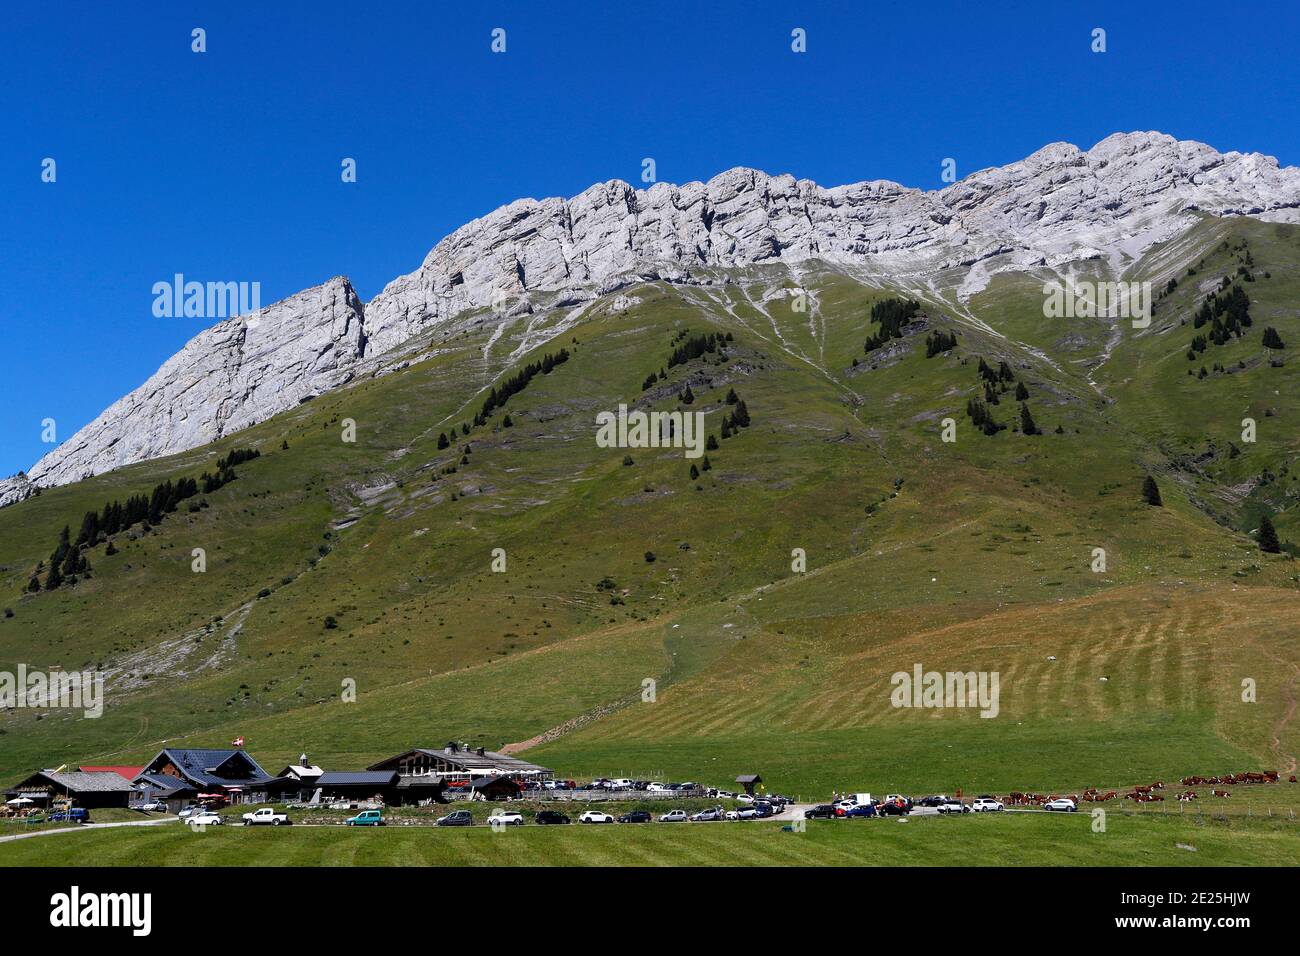 The Col des Aravis is a mountain pass in the French Alps that connects the towns of La Clusaz in Haute-Savoie with La Giettaz in Savoie.  France. Stock Photo